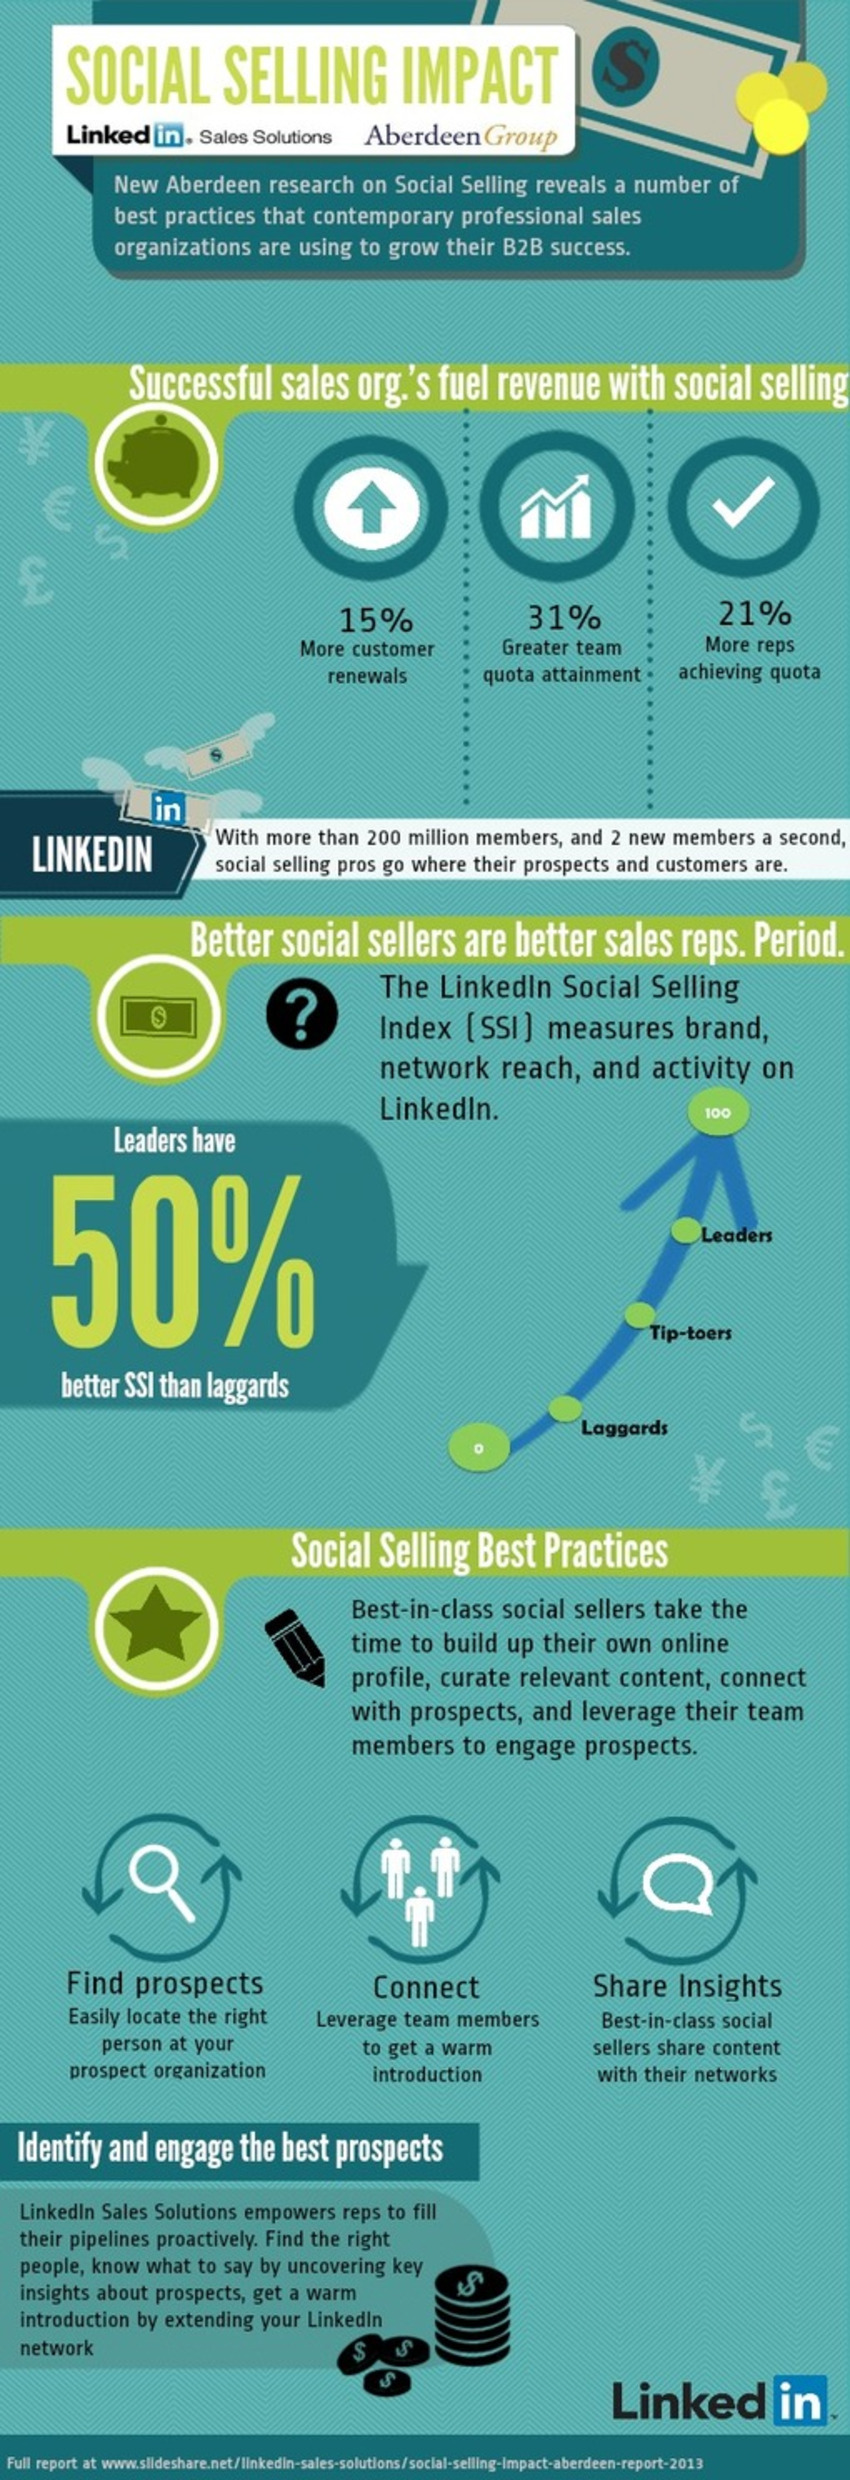 The Powerful Force of Social Sales [INFOGRAPHIC] - Contently | The MarTech Digest | Scoop.it